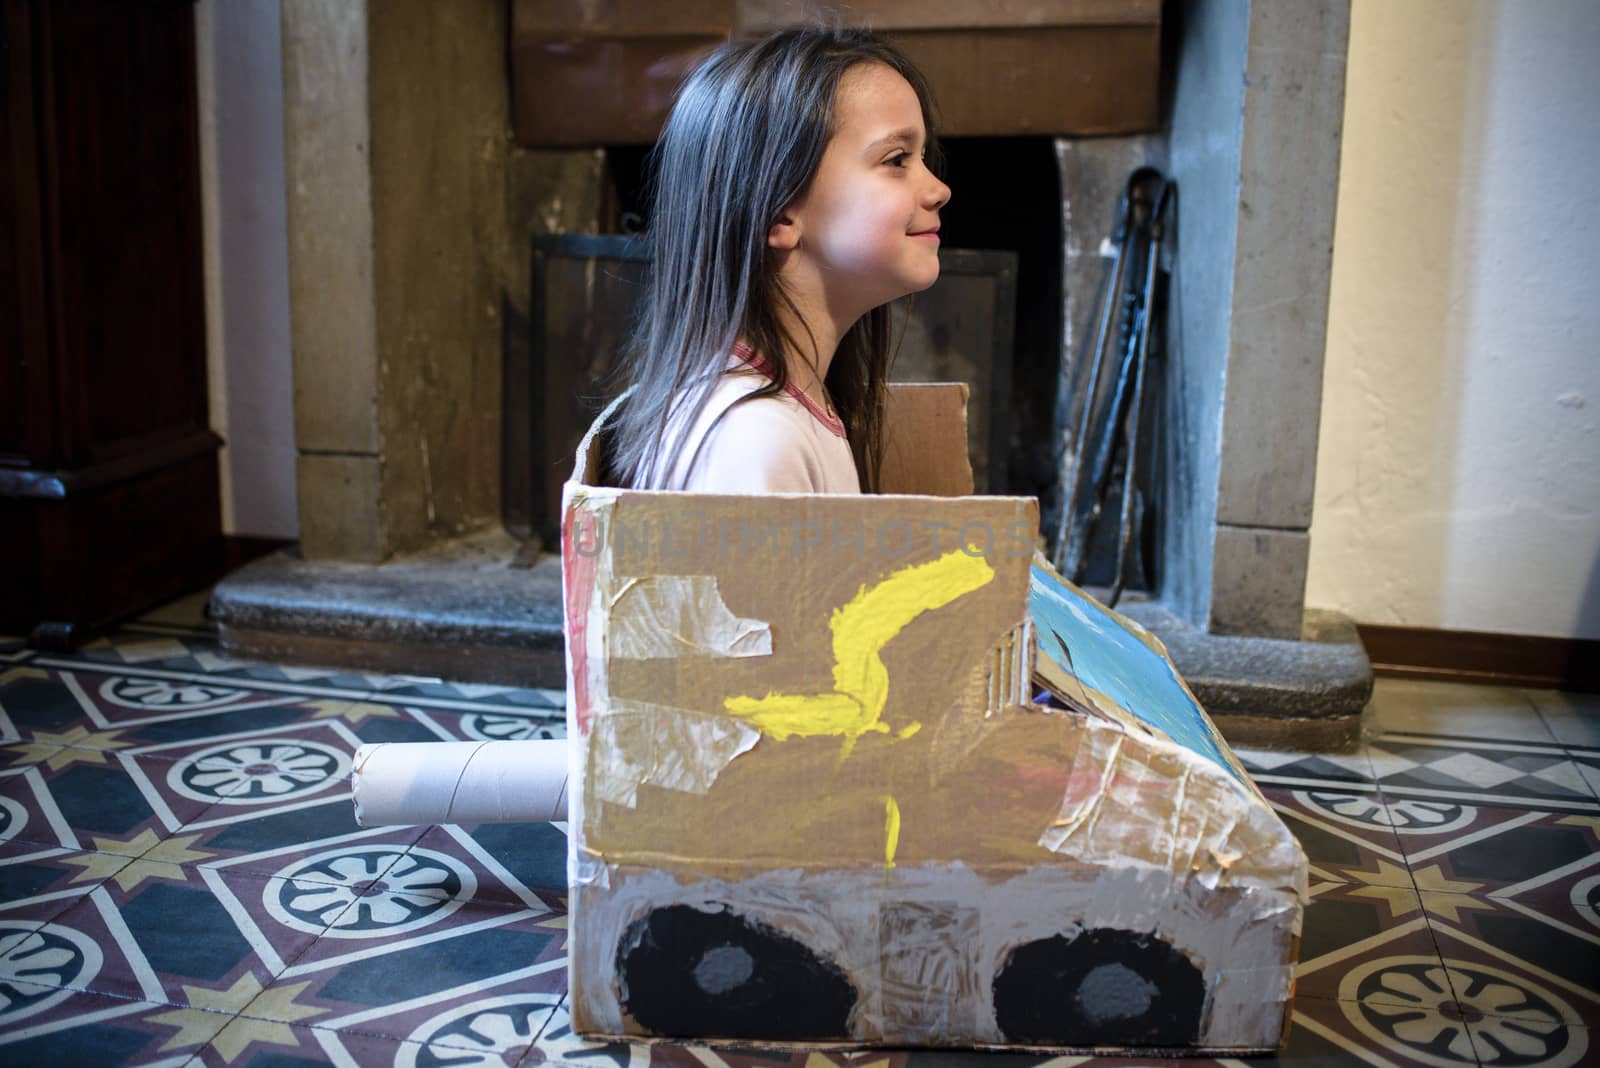 5-year-old girl plays with a self-made cardboard car, at home in her pajamas in the morning